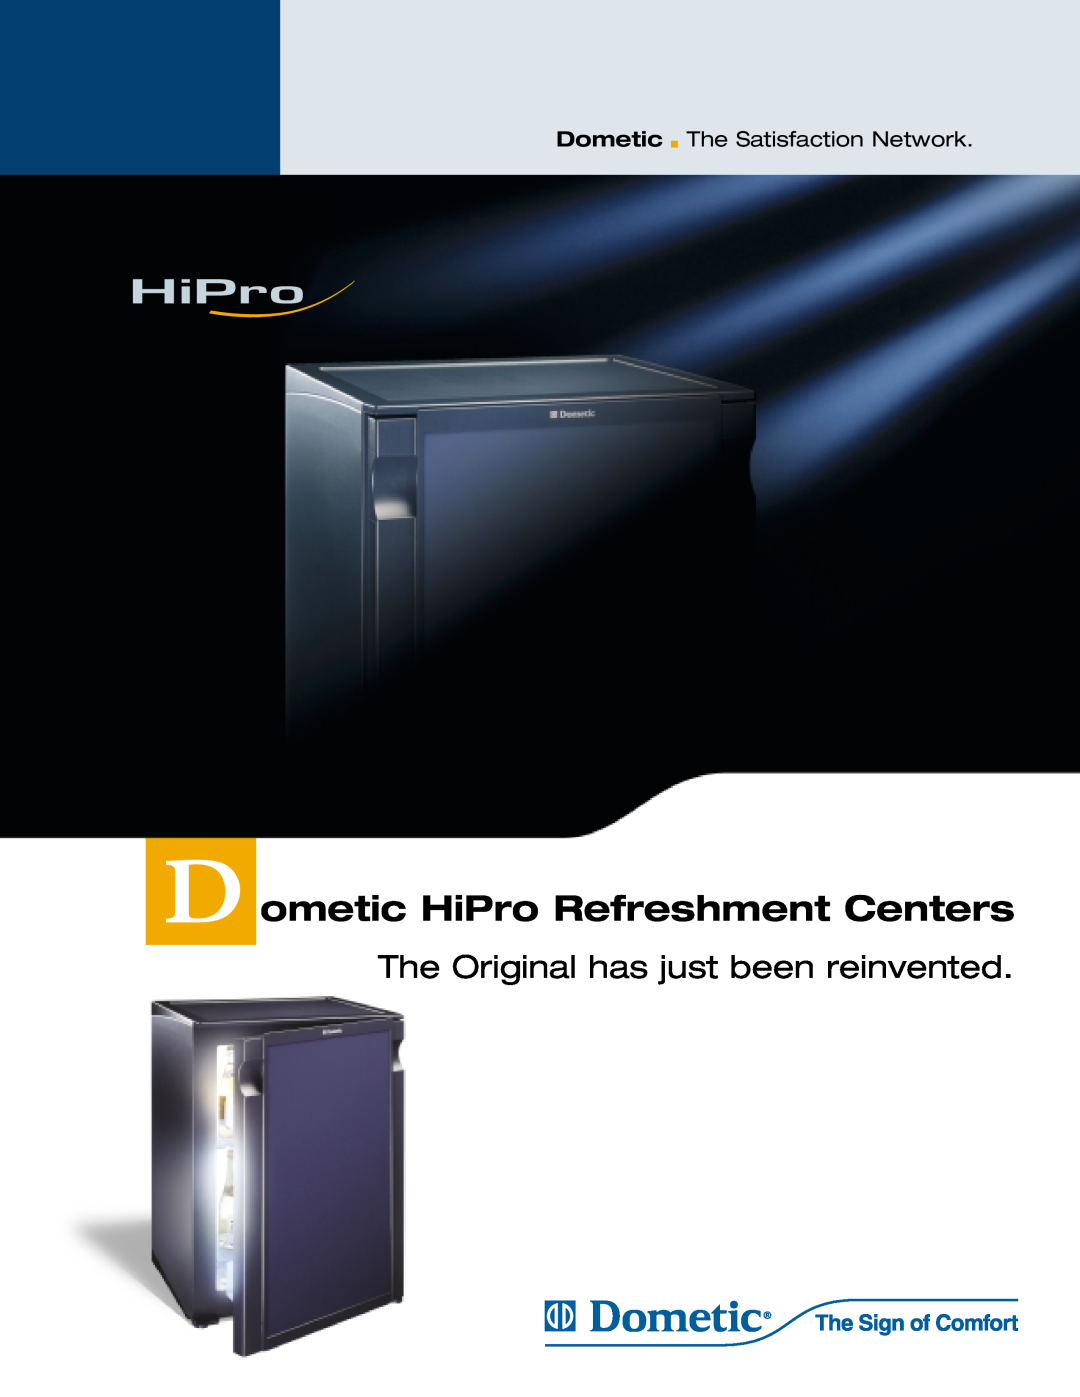 Dometic 6000 manual D ometic HiPro Refreshment Centers, The Original has just been reinvented 